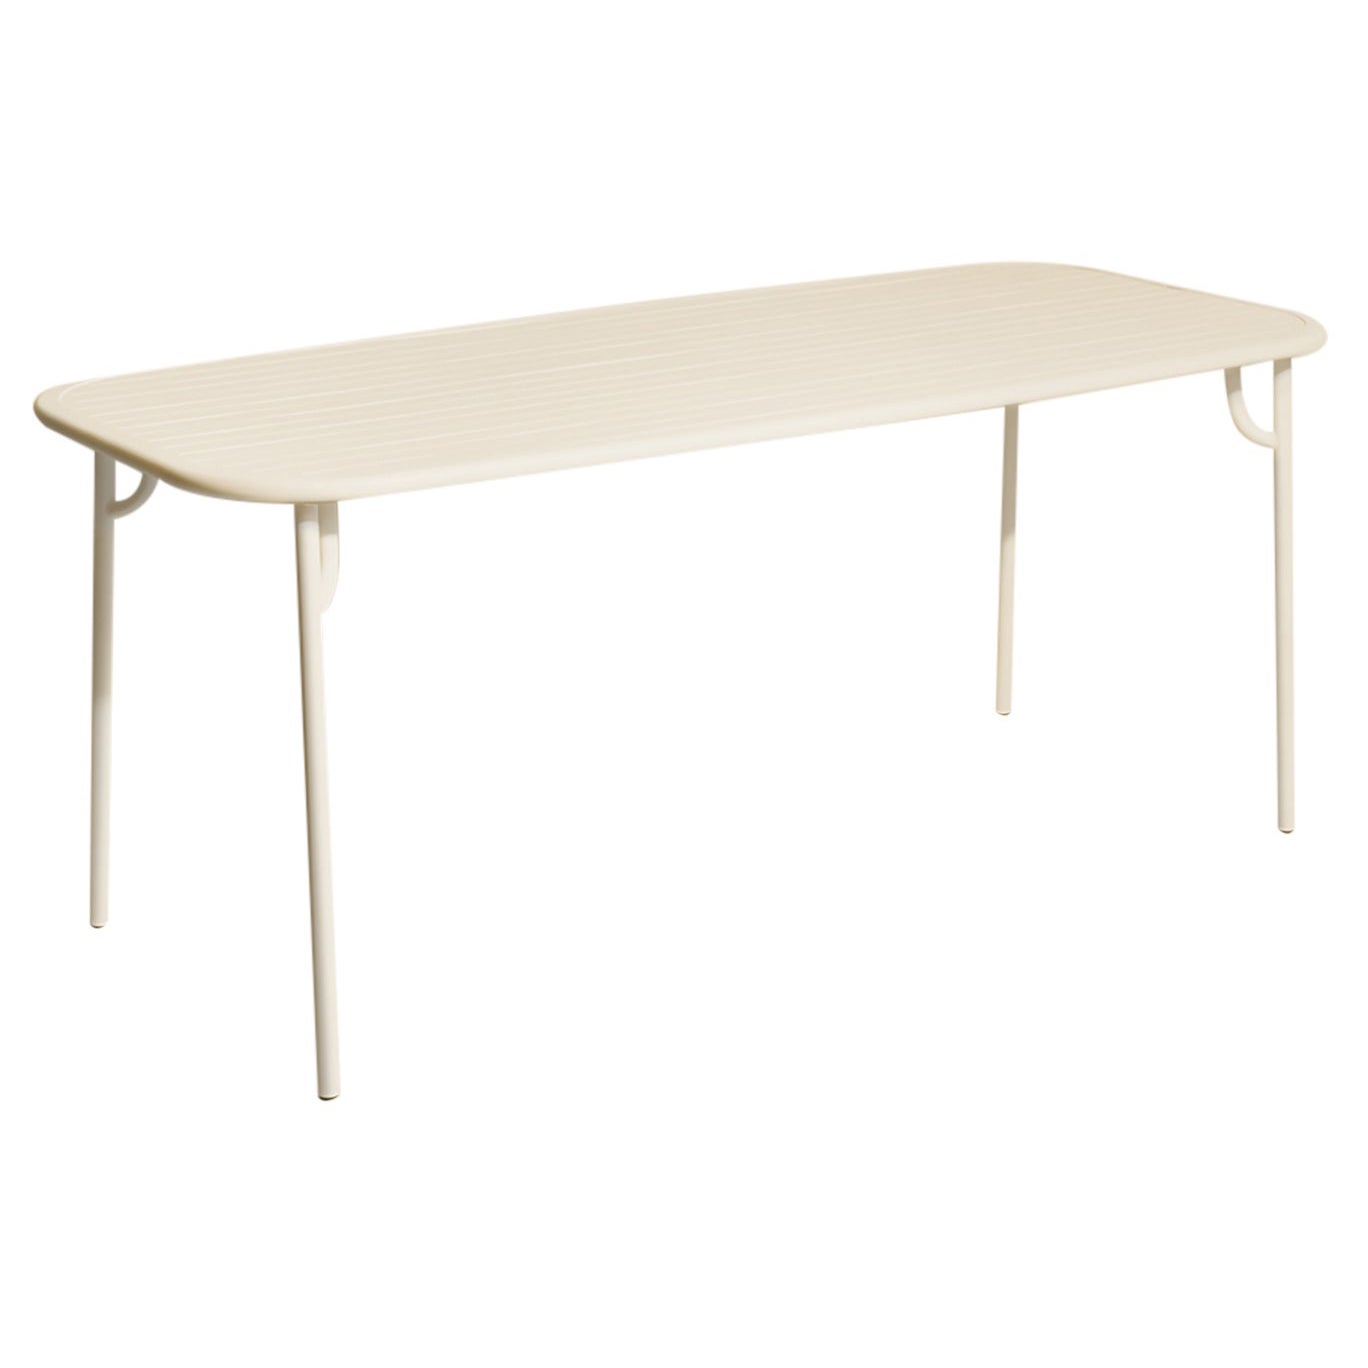 Petite Friture Week-End Medium Rectangular Dining Table in Ivory with Slats For Sale